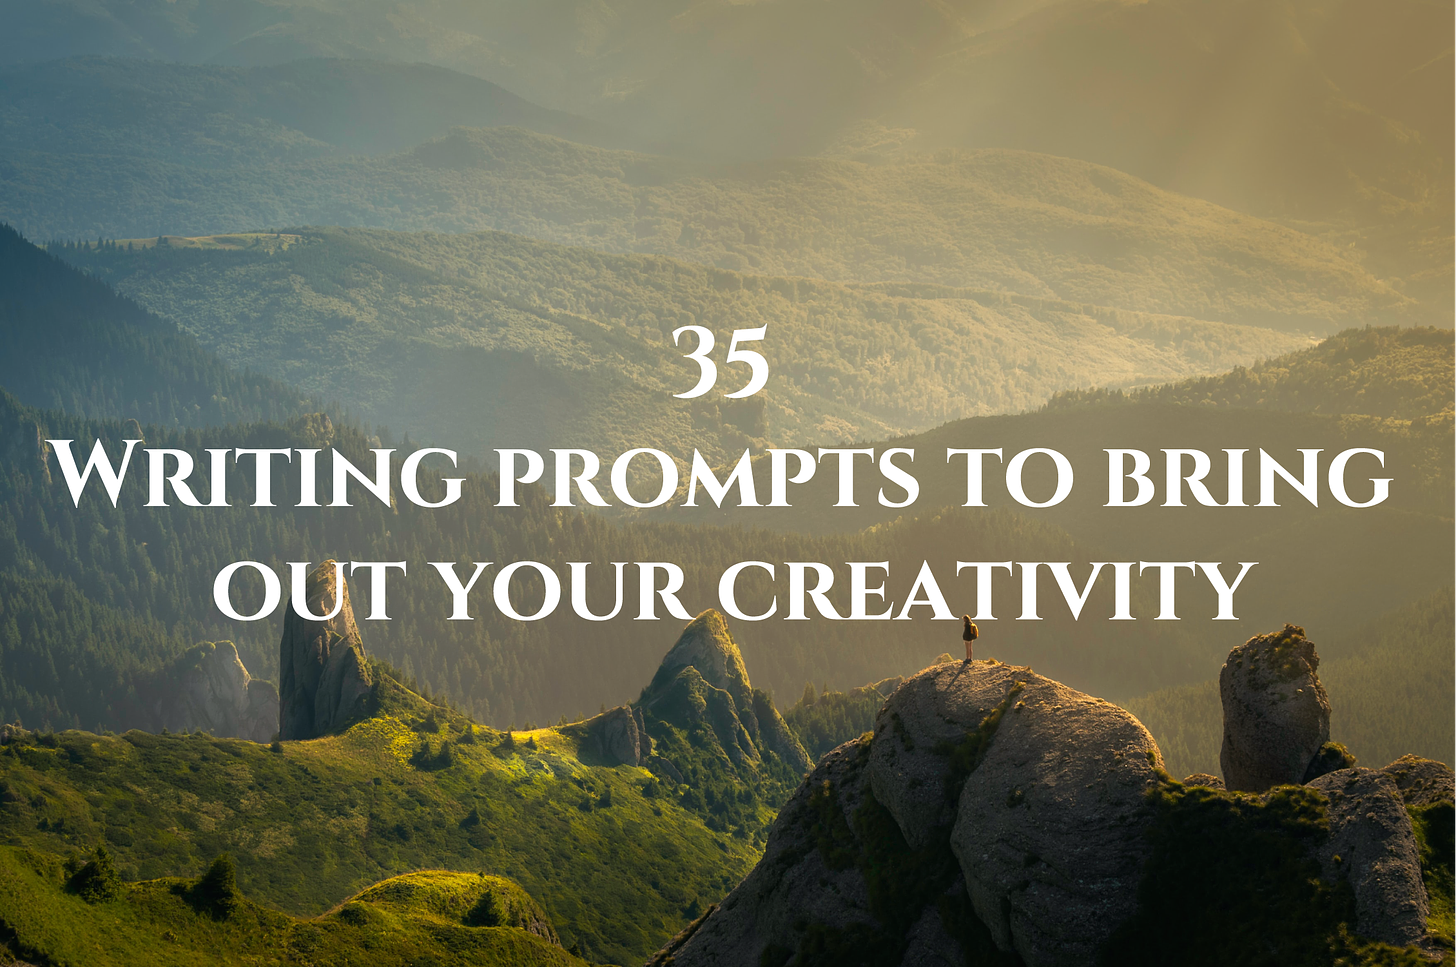 Writing prompts to bring out your creativity.